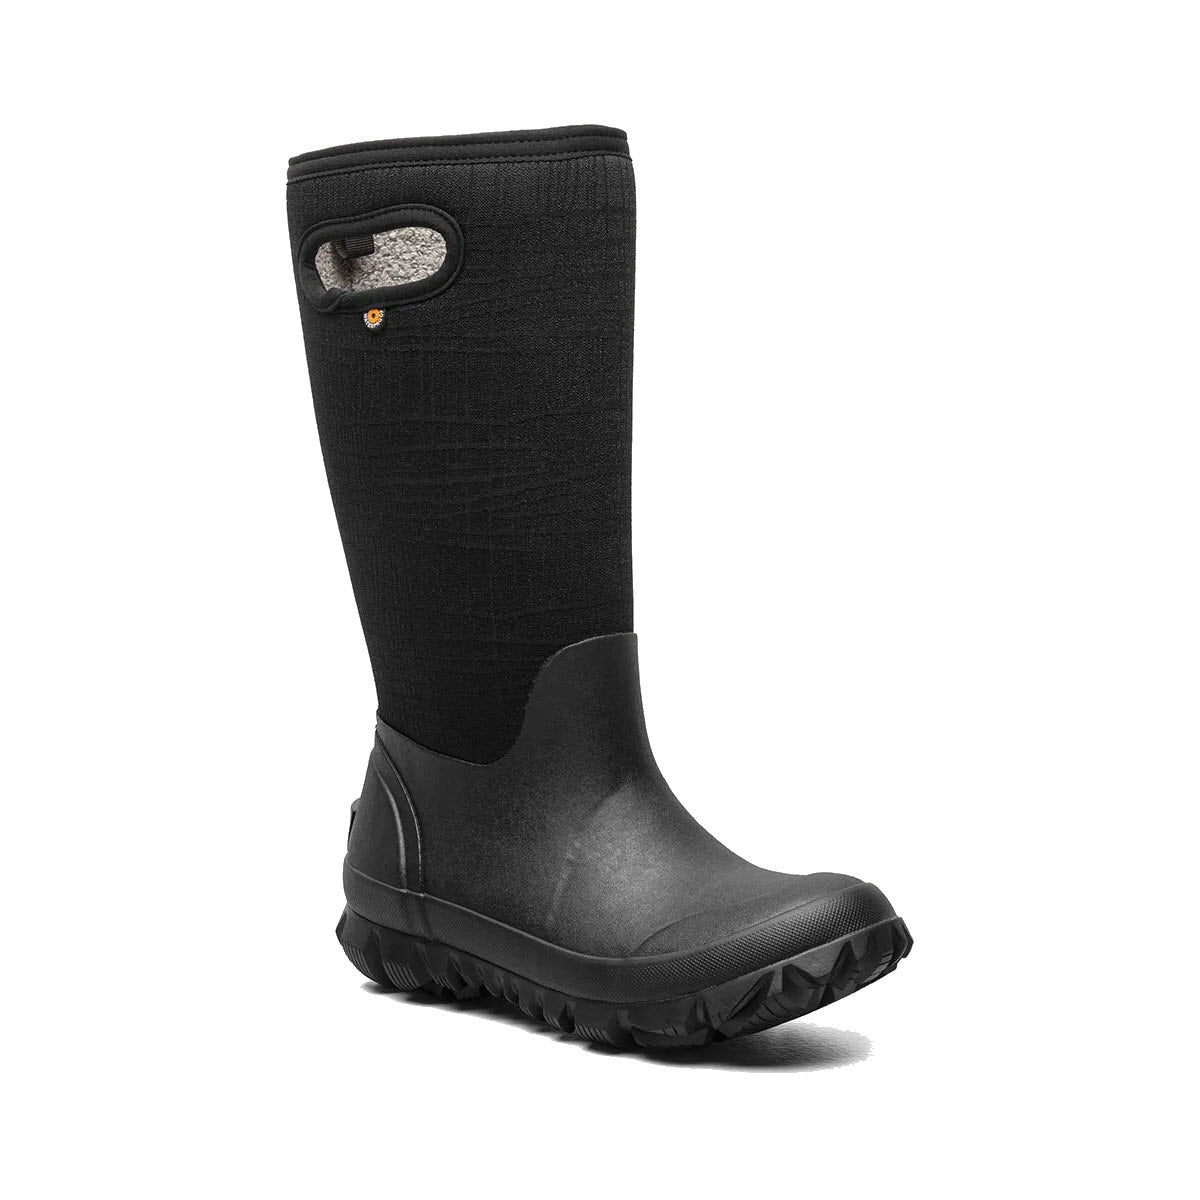 Black rubber boot with a fleece lining and a rugged sole, isolated on a white background.
Product Name: Bogs Whiteout Cracks Black - Womens
Brand Name: Bogs